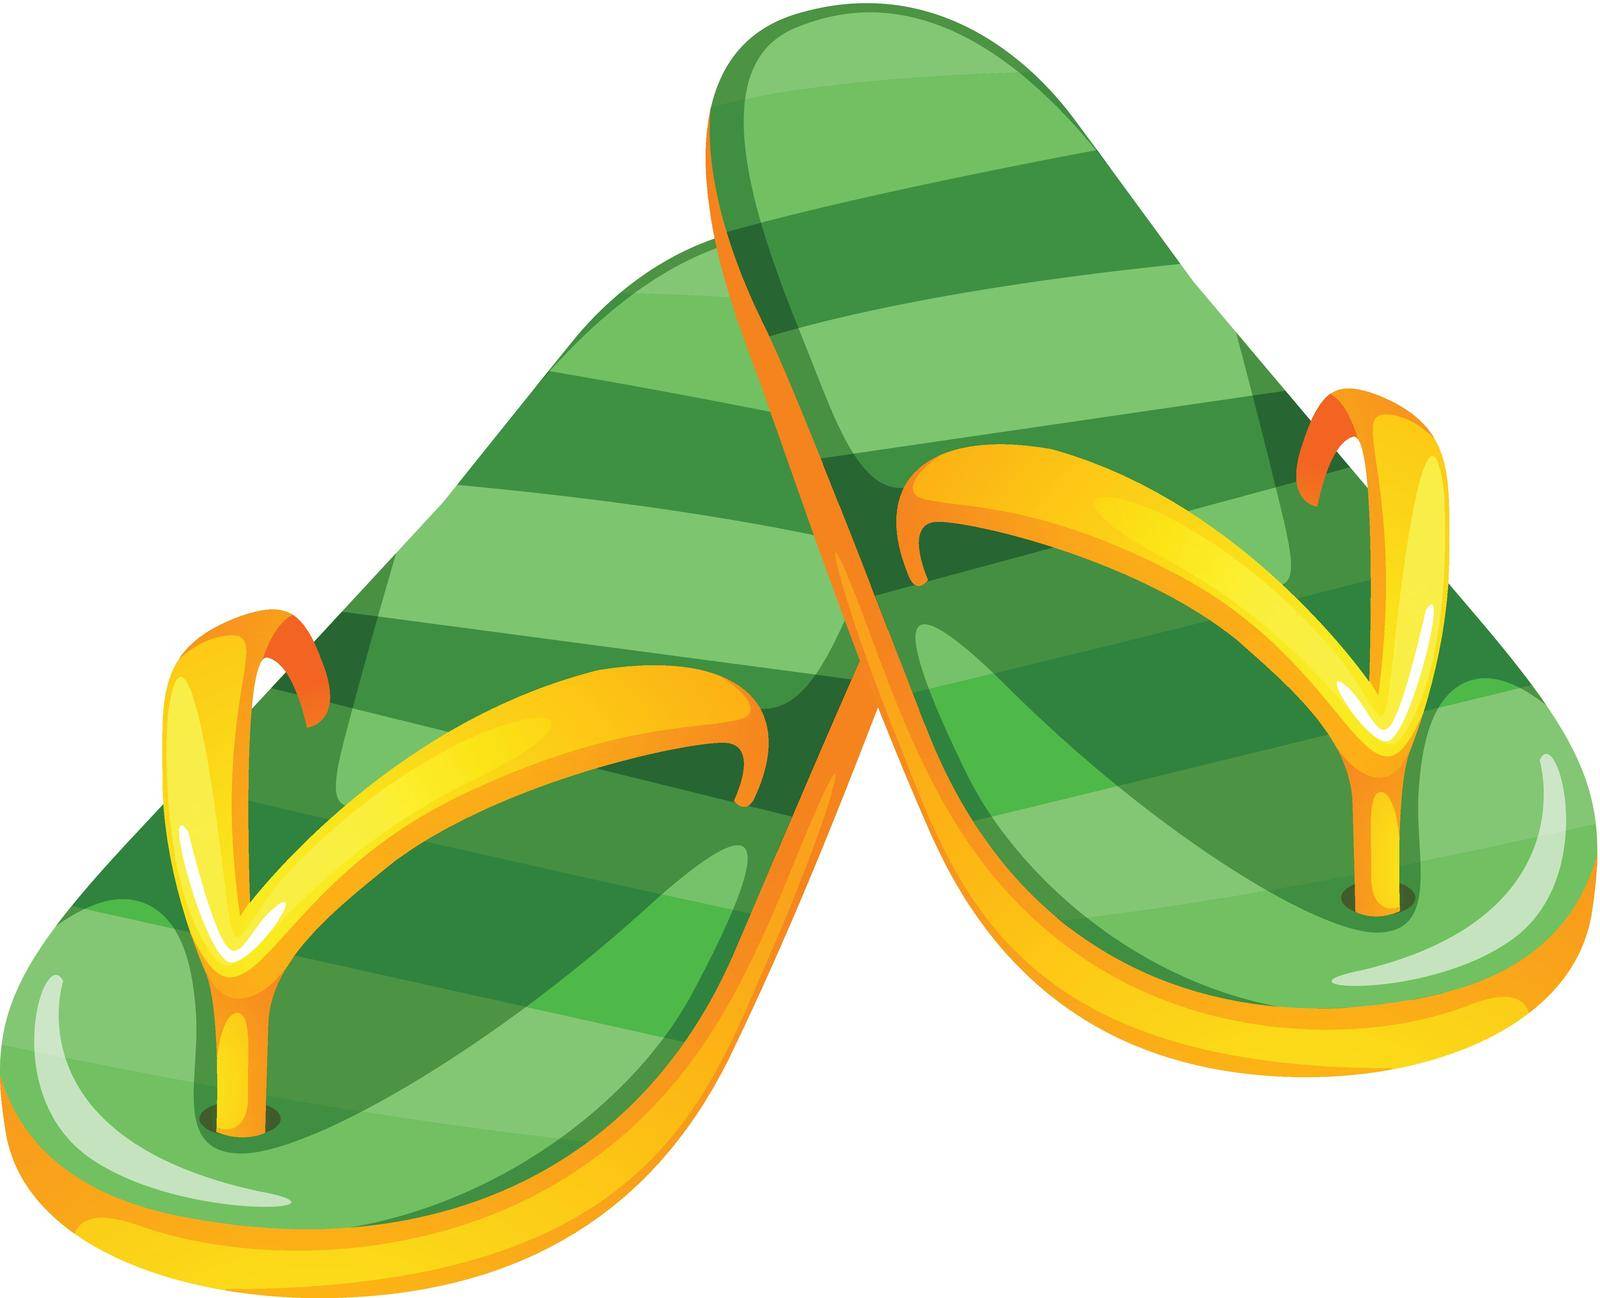 Illustration of a pair of green slippers on a white background